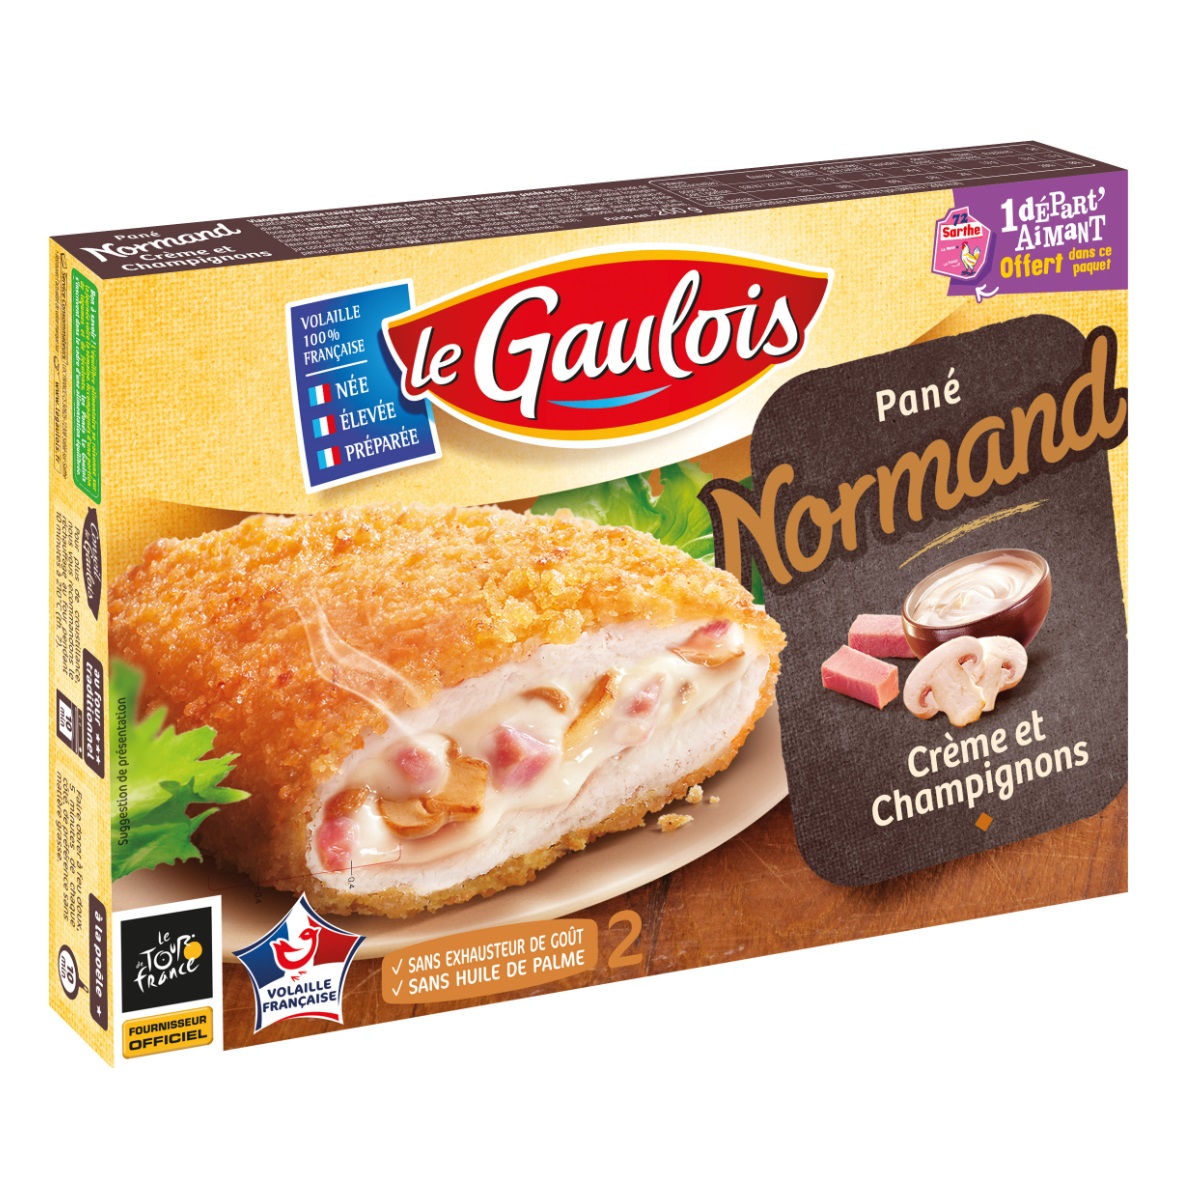 Le Gaulois Breaded Normand x2 200g